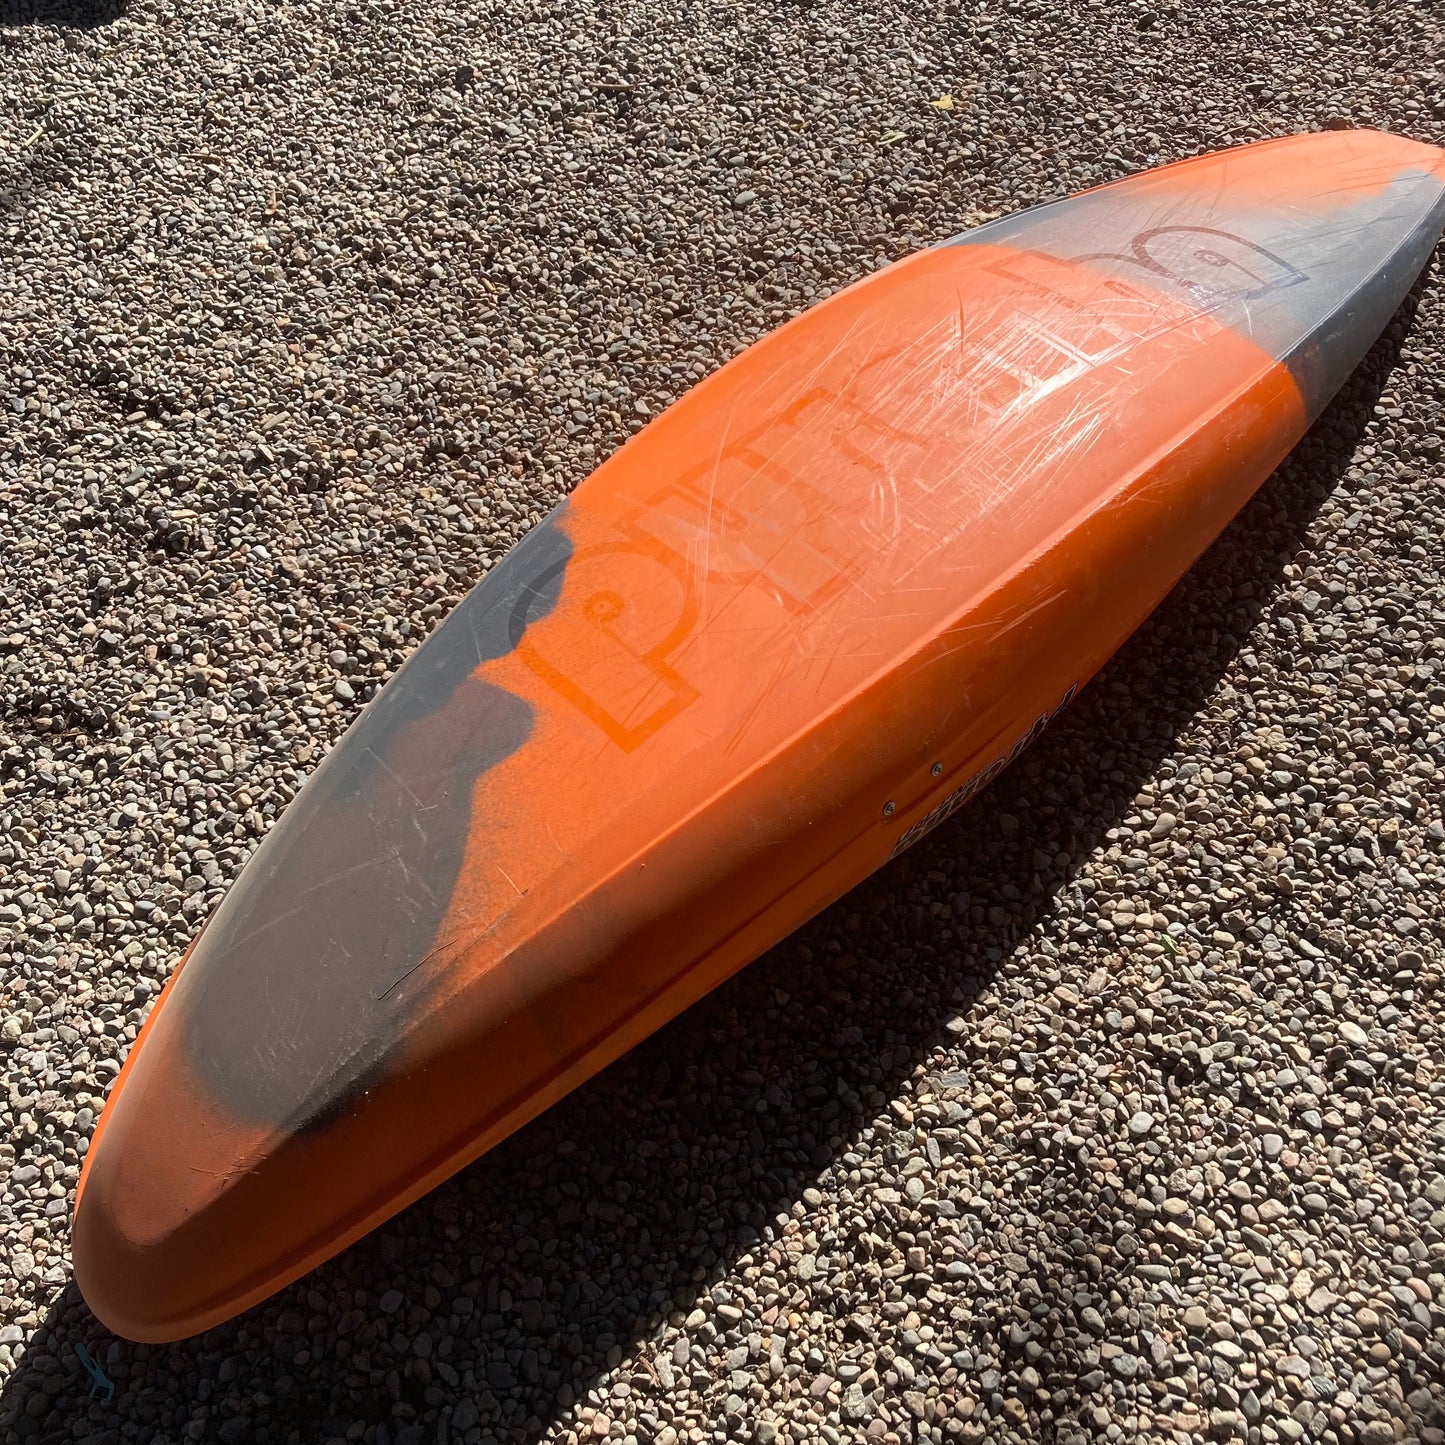 An orange and black Pyranha Demo Ripper 2.0 LG paddle board laying on the ground.